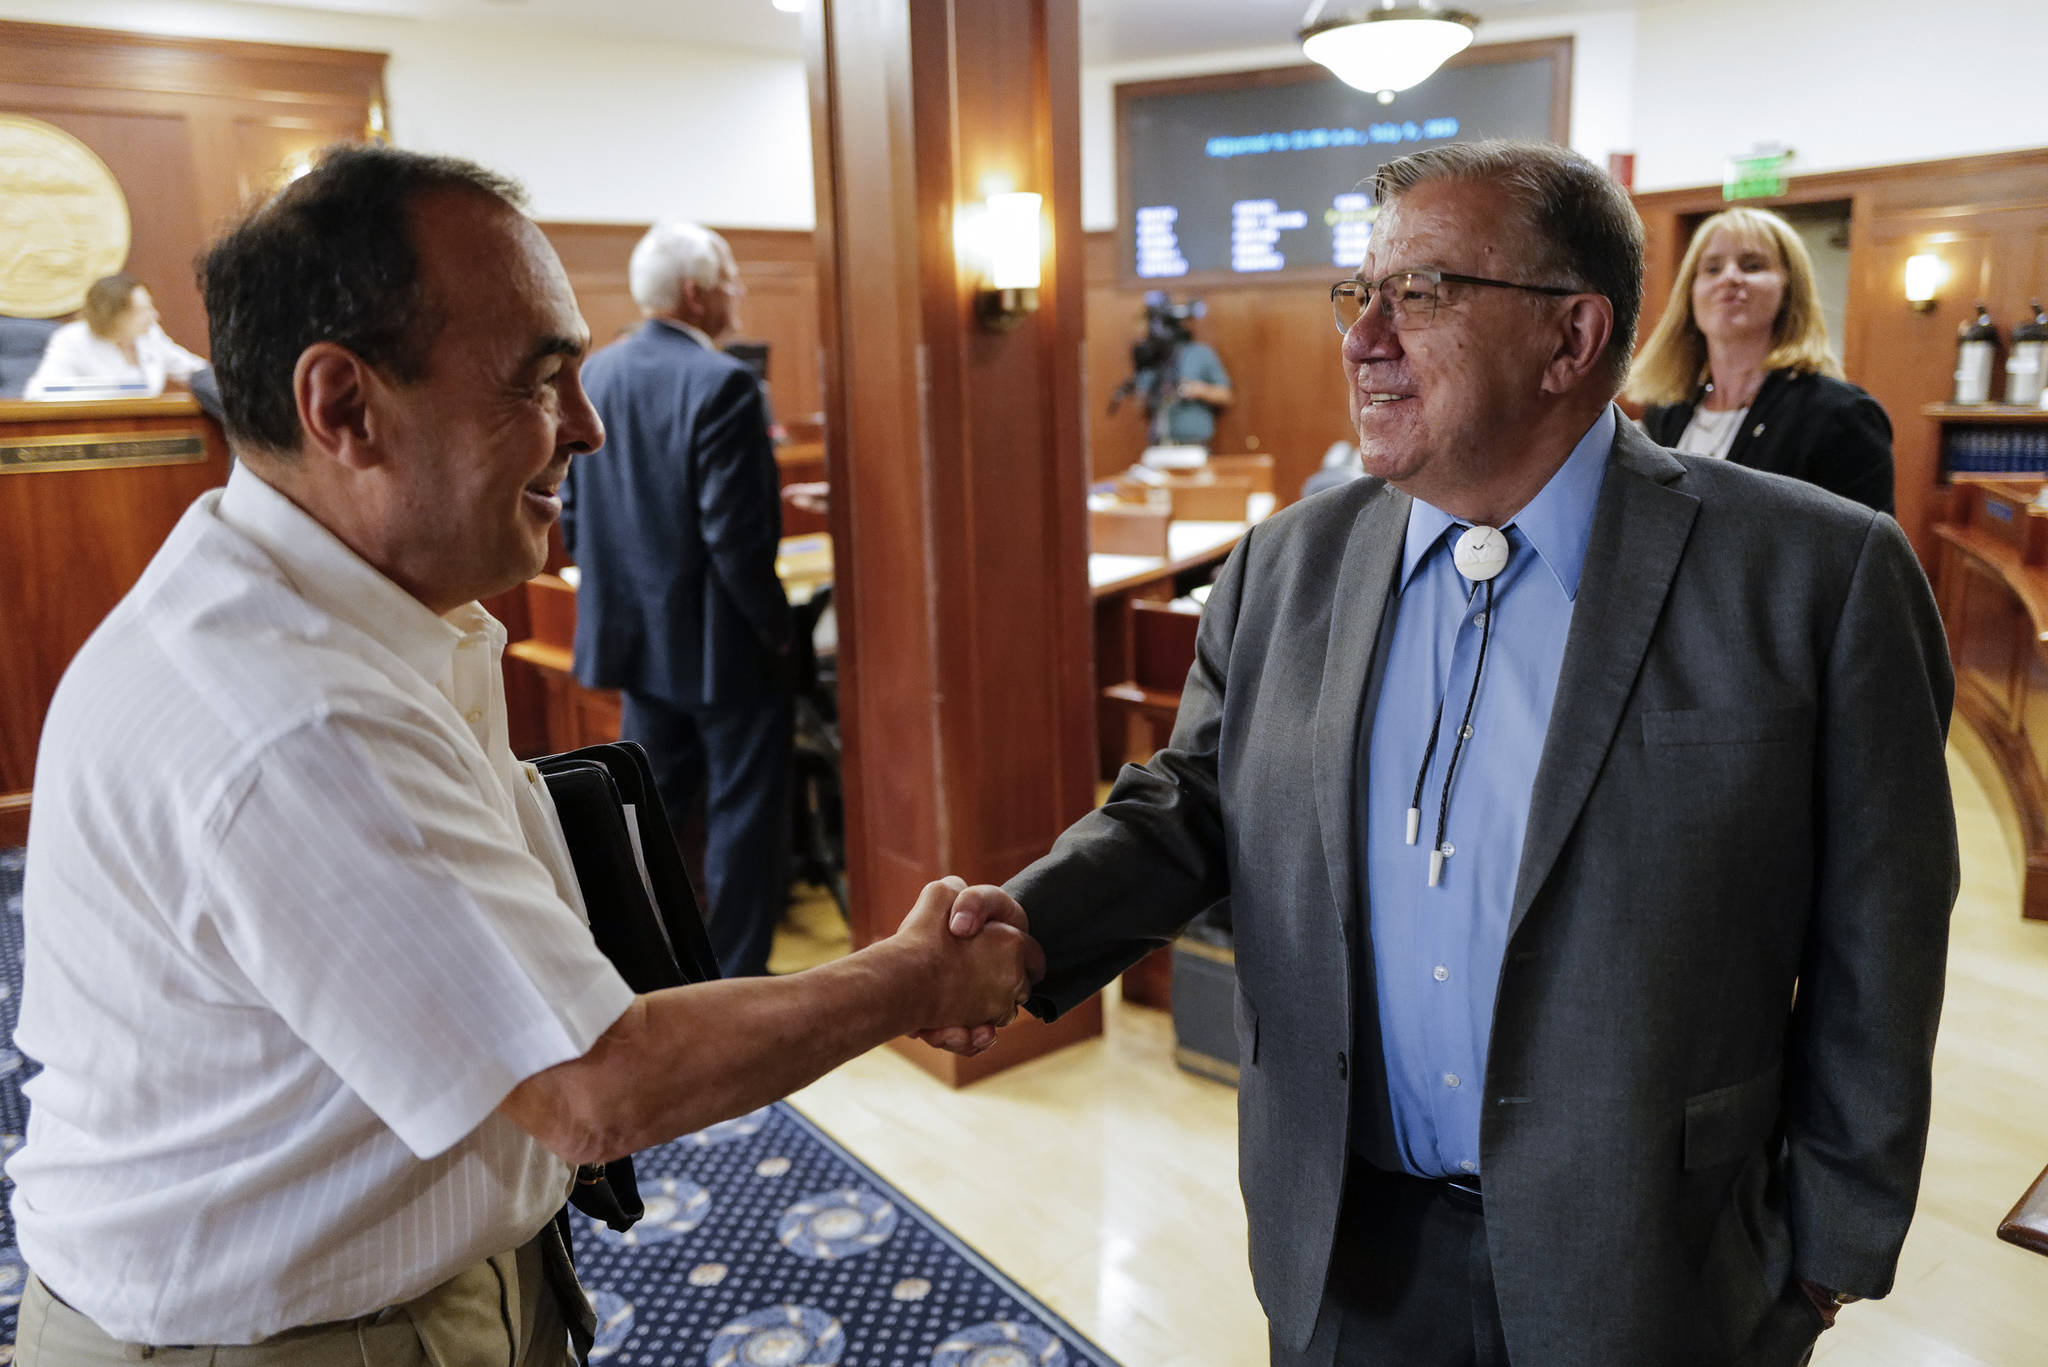 Sen. Lyman Hoffman, D-Bethel, right, is congratulated by Sen. Donny Olson, D-Golovin, after being named the new Senate Majority Leader, replacing Sen. Mia Costello, R-Anchorage, on the first day of the Second Special Session of the Alaska Legislature in Juneau on Monday, July 8, 2019. Sen. Costello joined a minority of legislators that met in Wasilla in support of Gov. Mike Dunleavy. (Michael Penn | Juneau Empire)